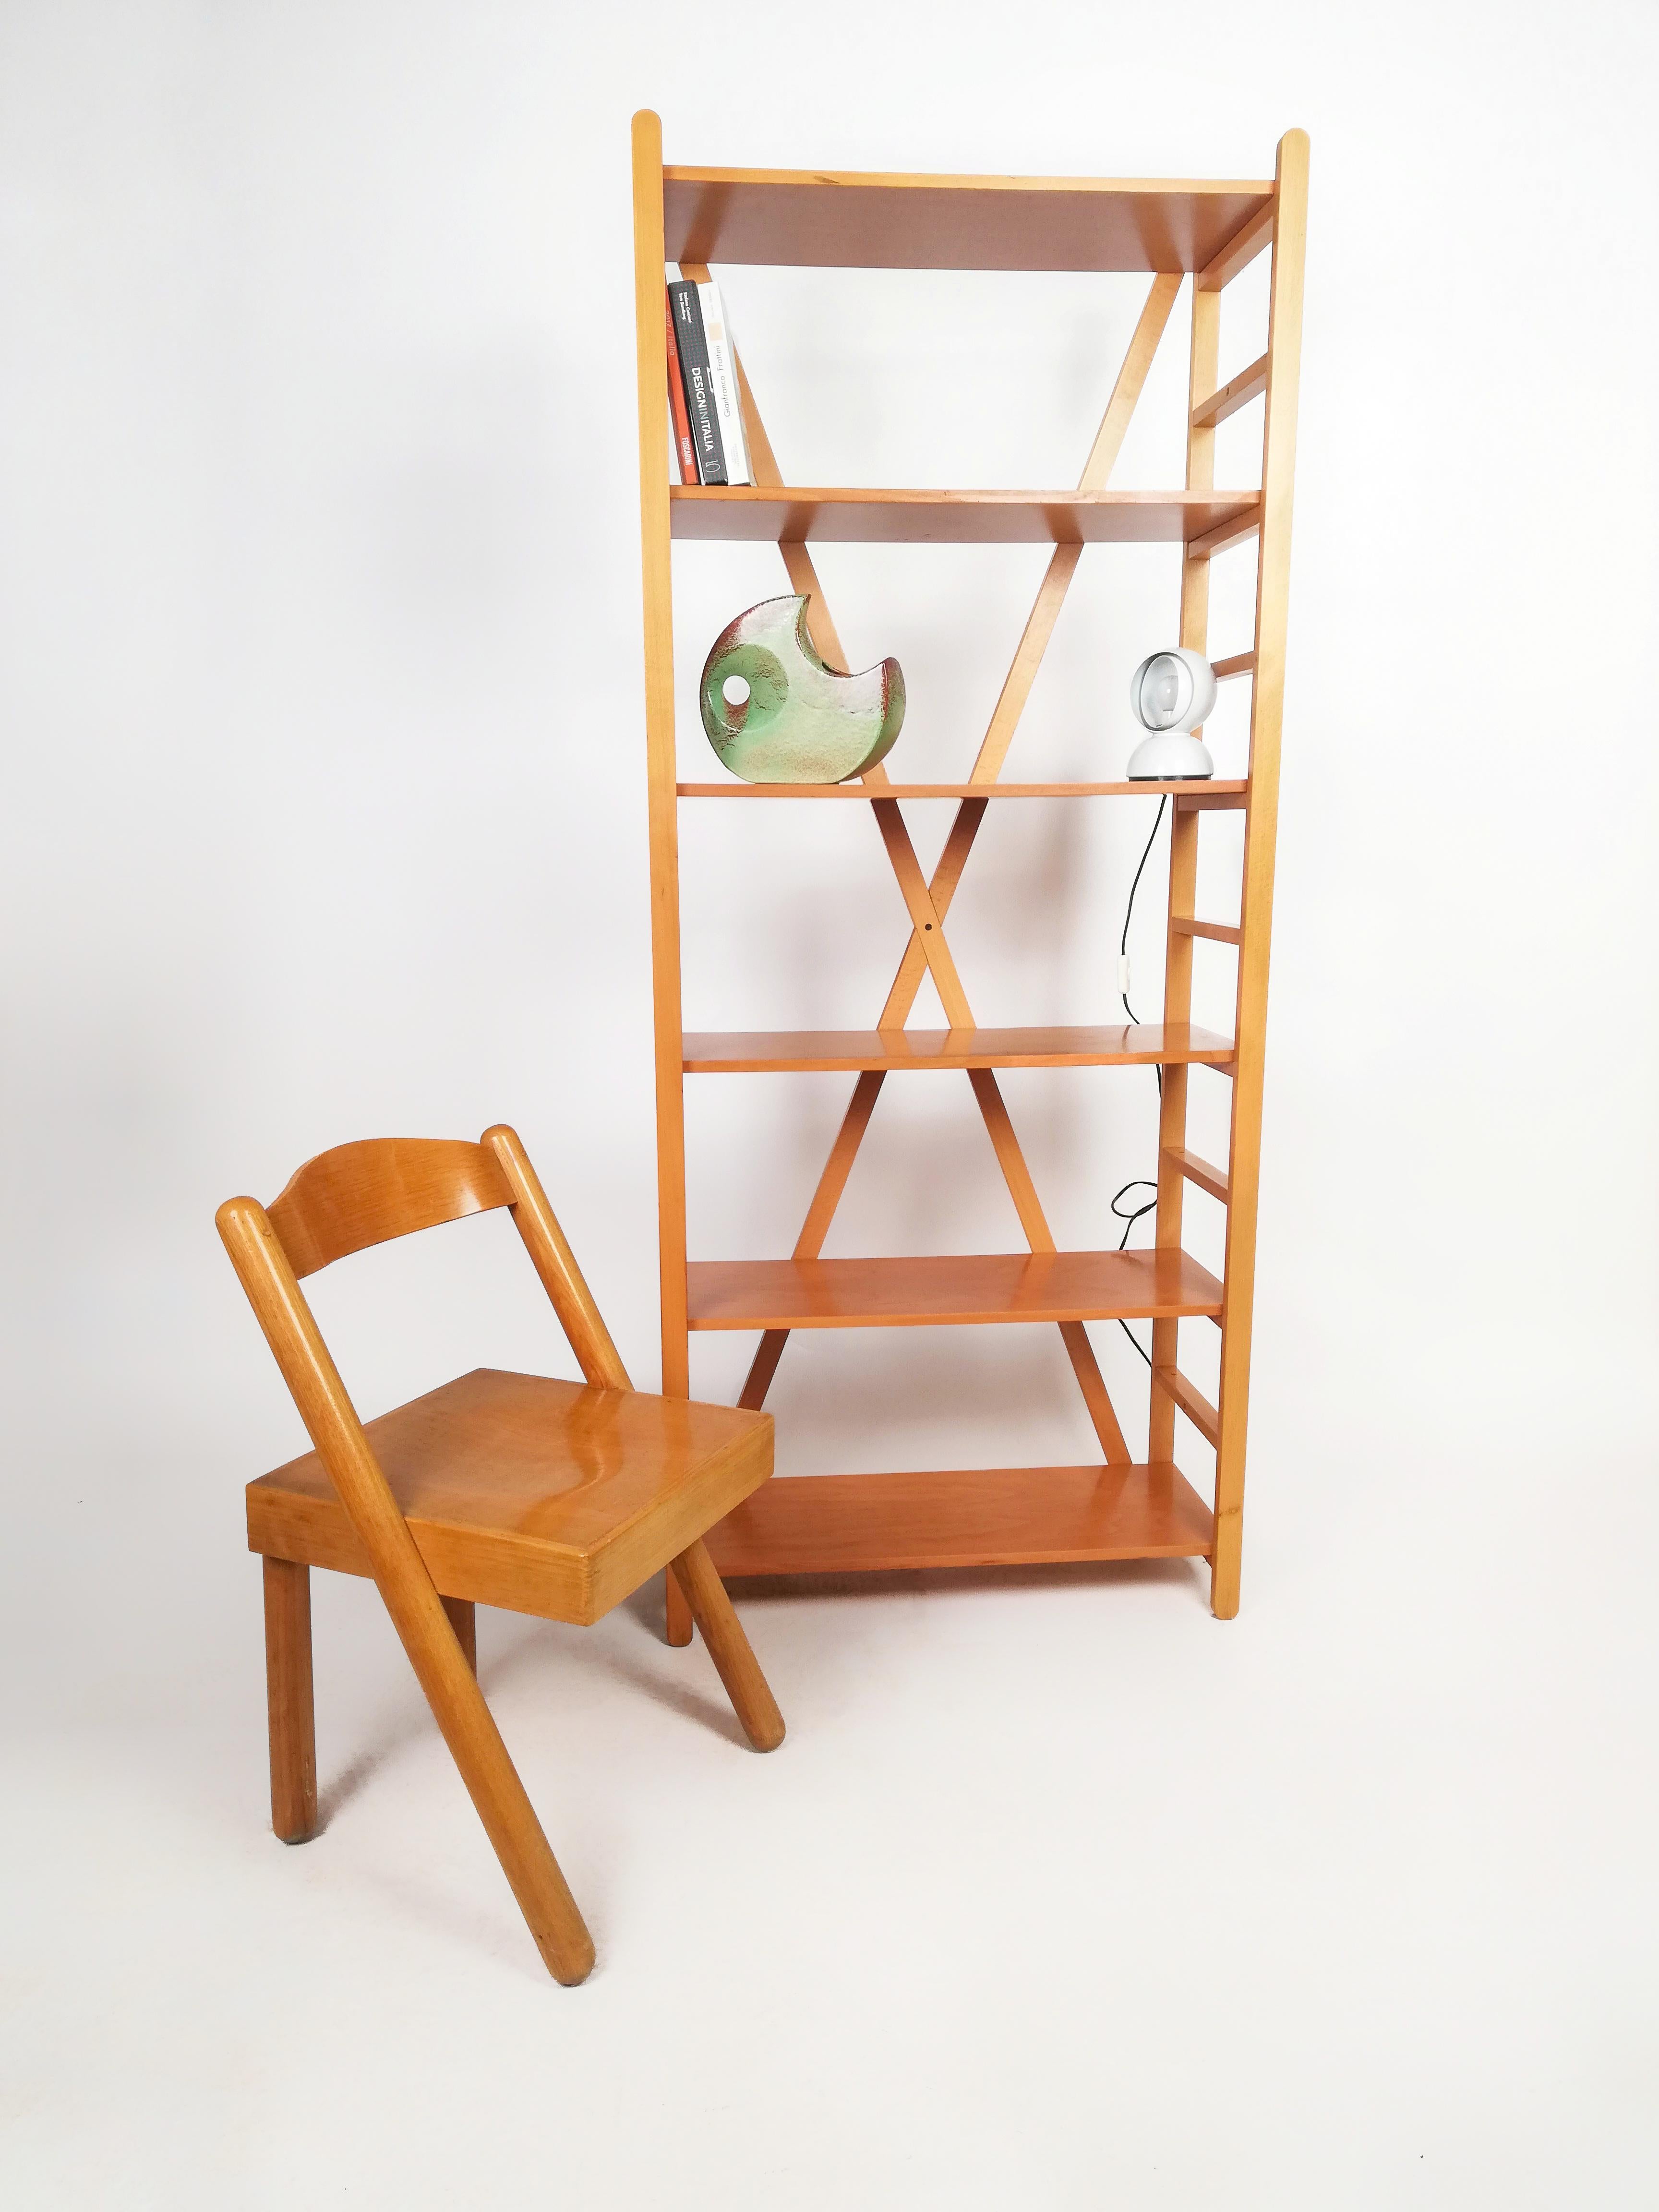 A rare bookcase in solid beech wood designed by Enrico Tonucci for his brand 